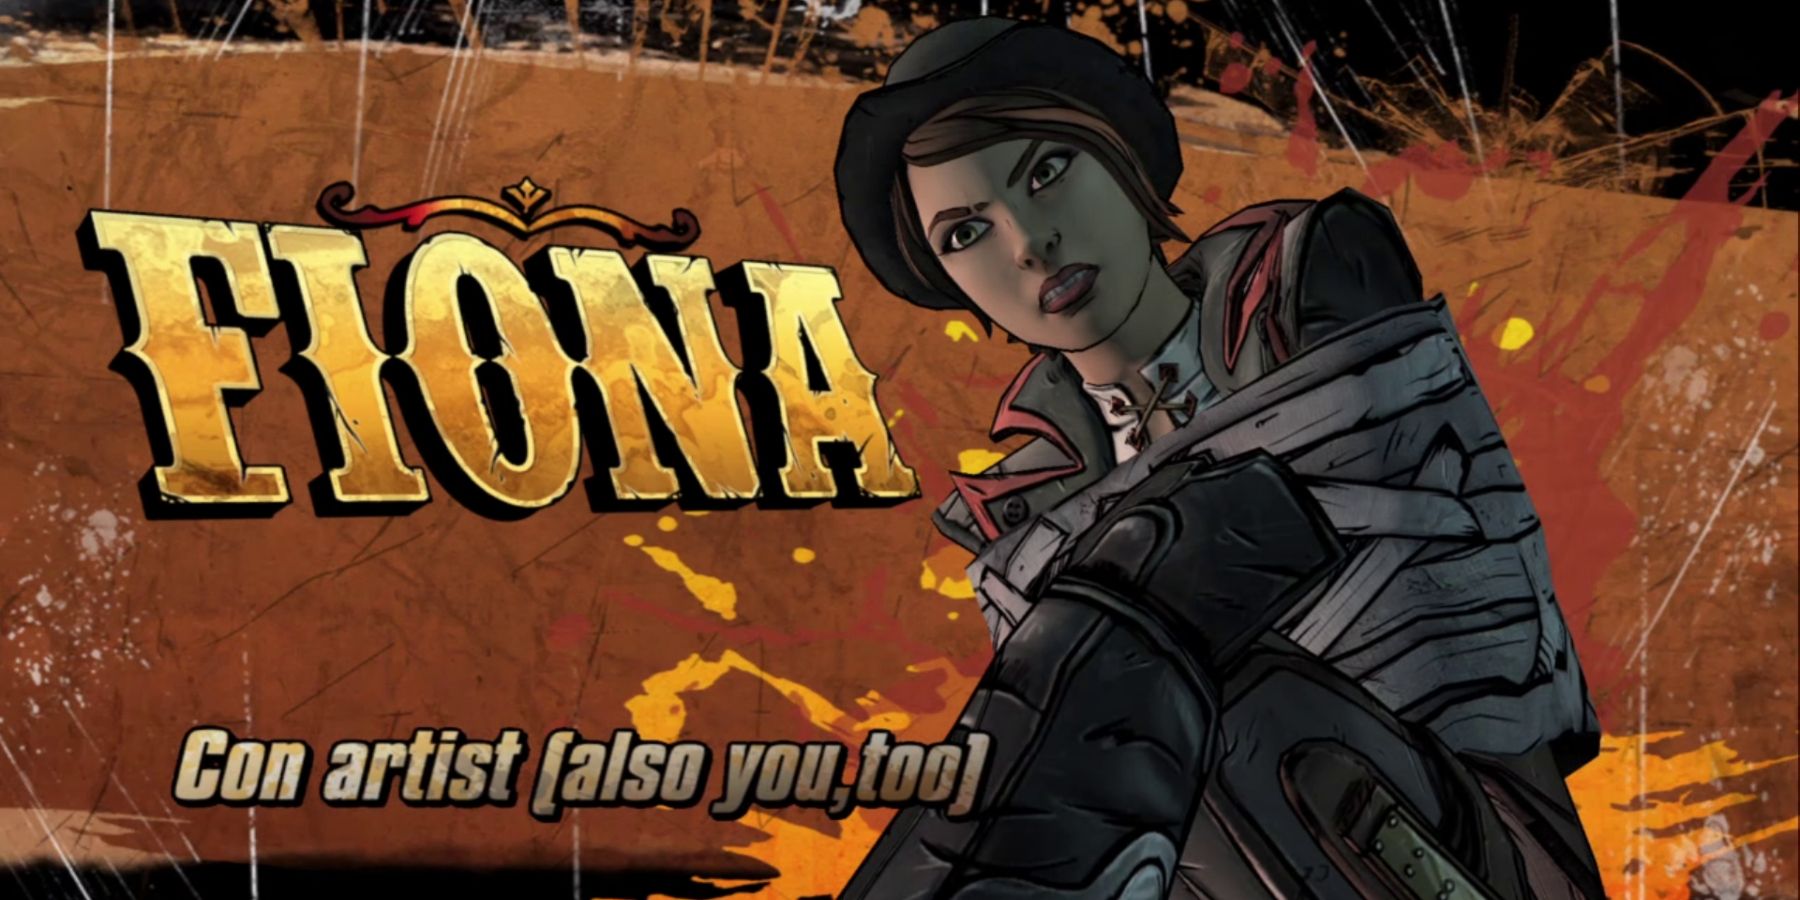 a young woman in a bowler hat and a dark coat with red trim. She's tied up. text reads: fiona: con artist (also you, too)